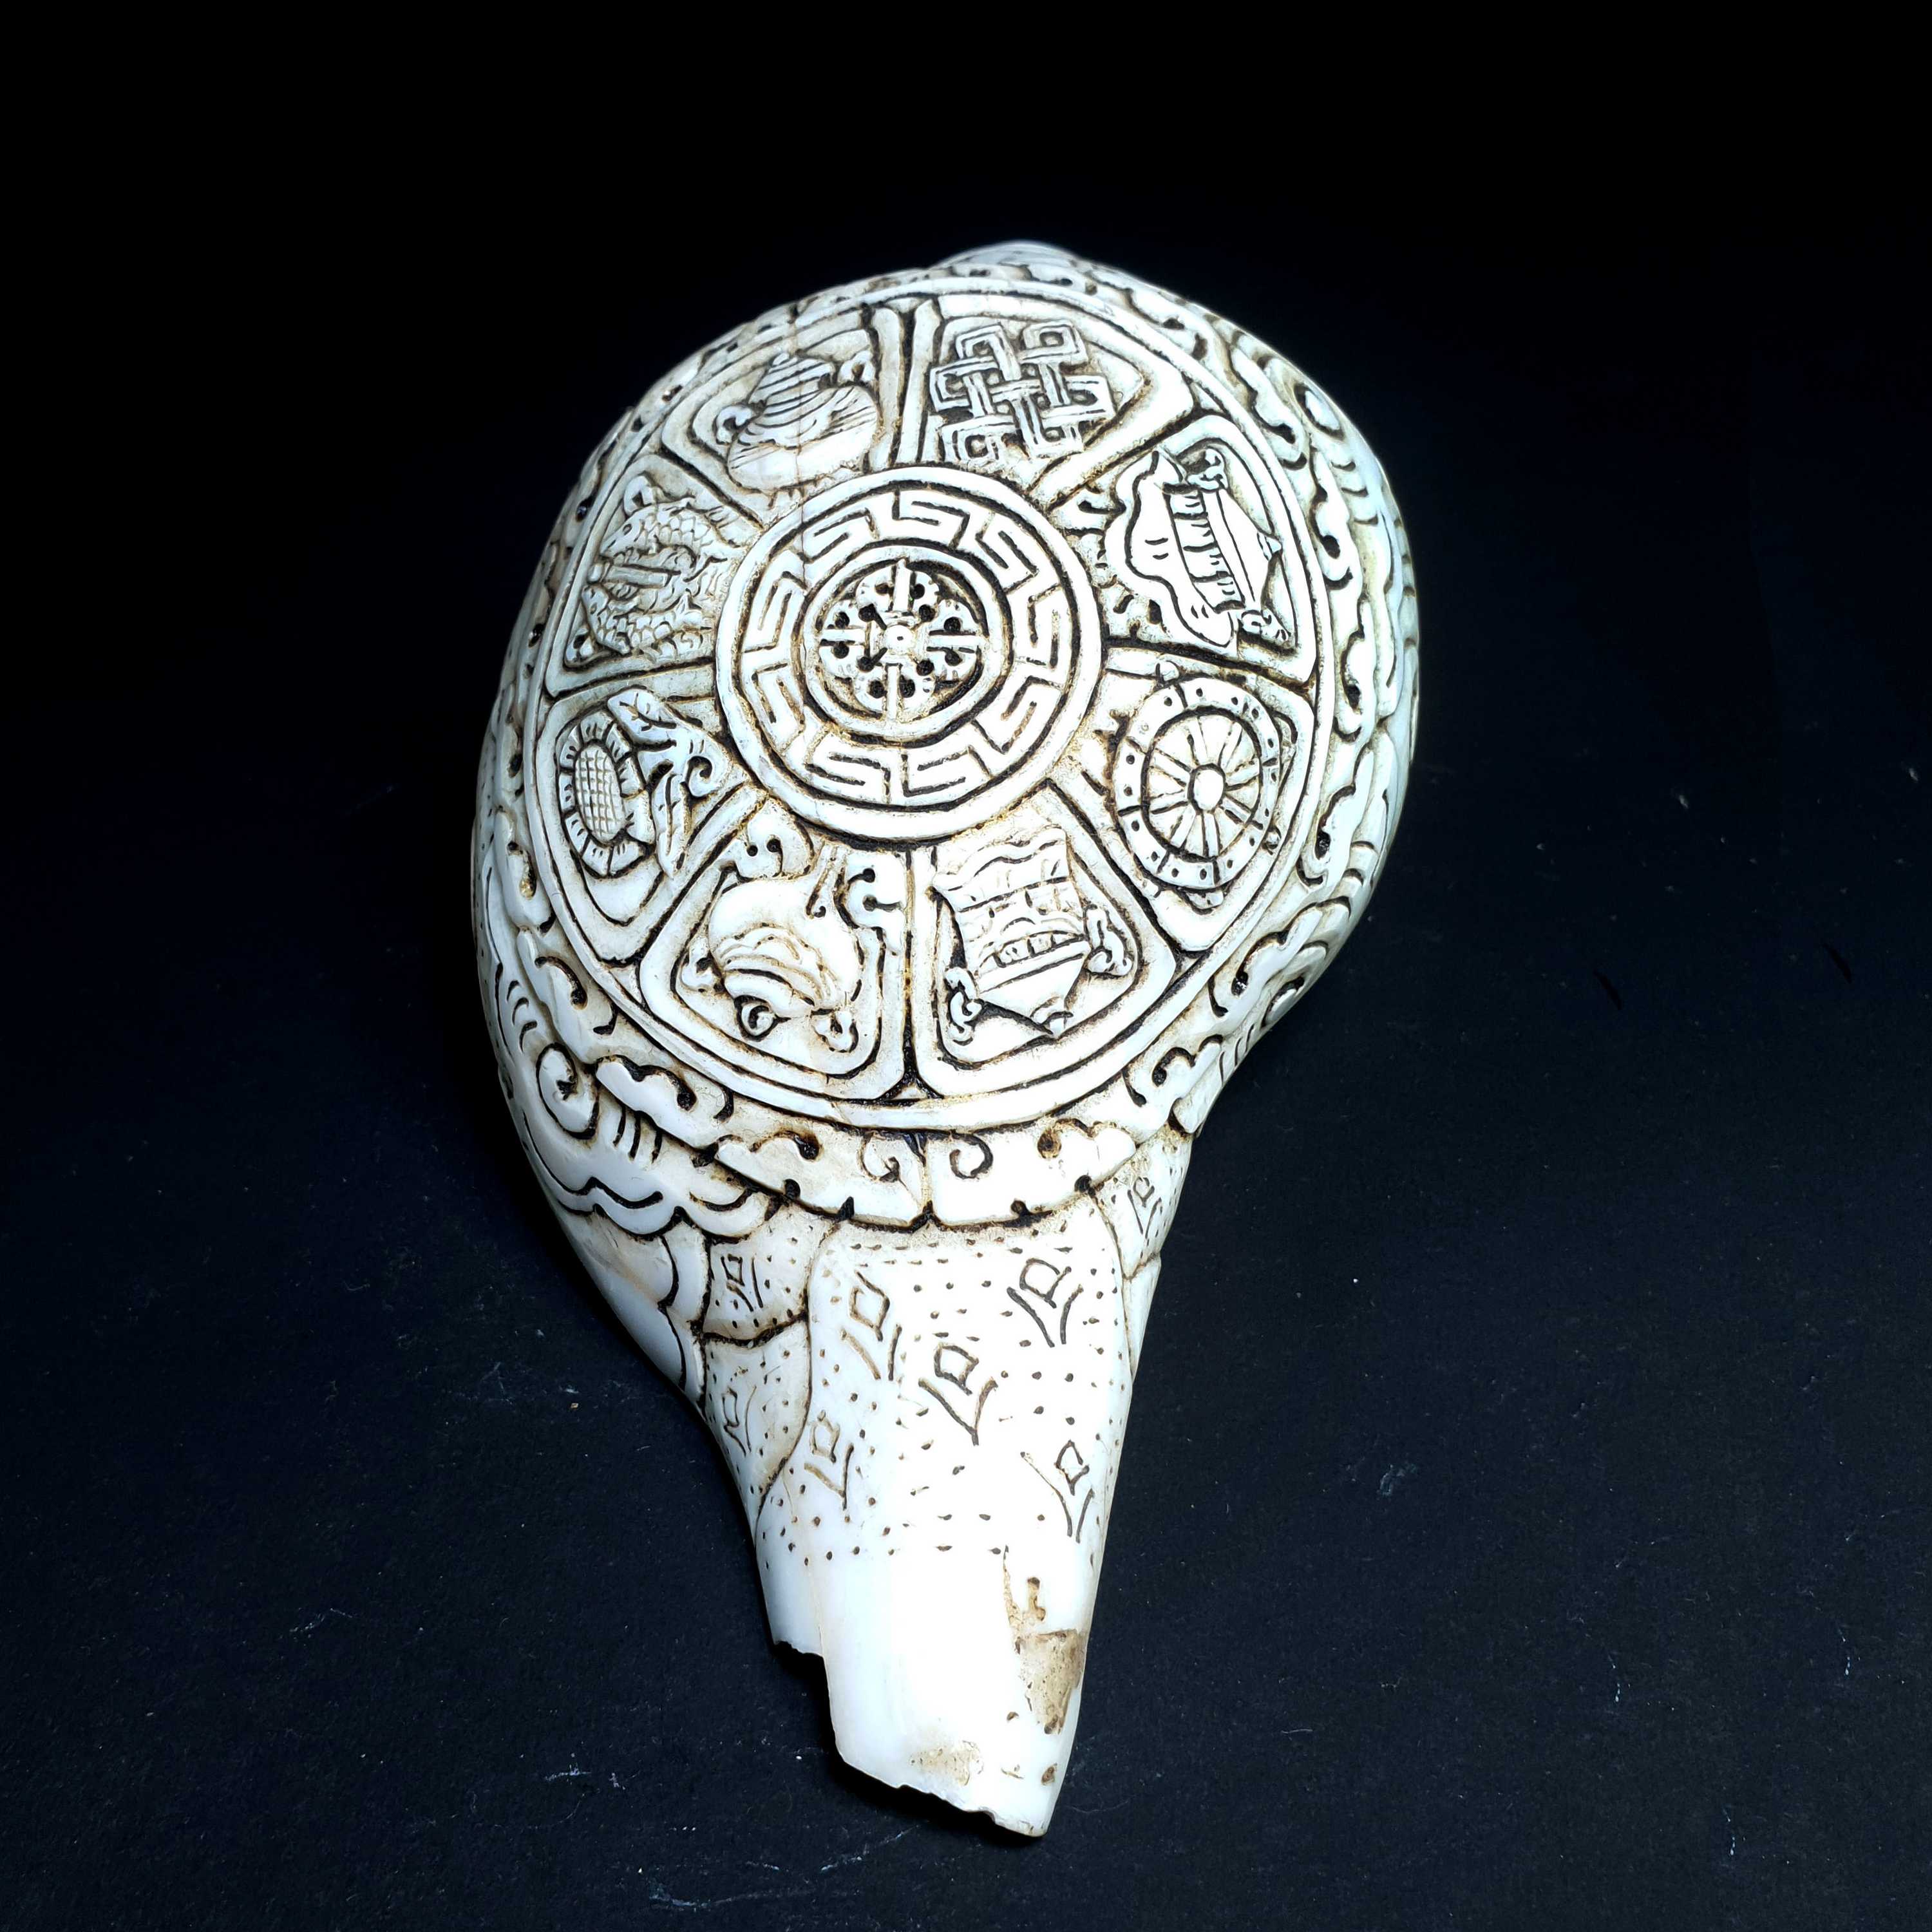 Tibetan Conch Shell With Ashtamangala S hand Carved